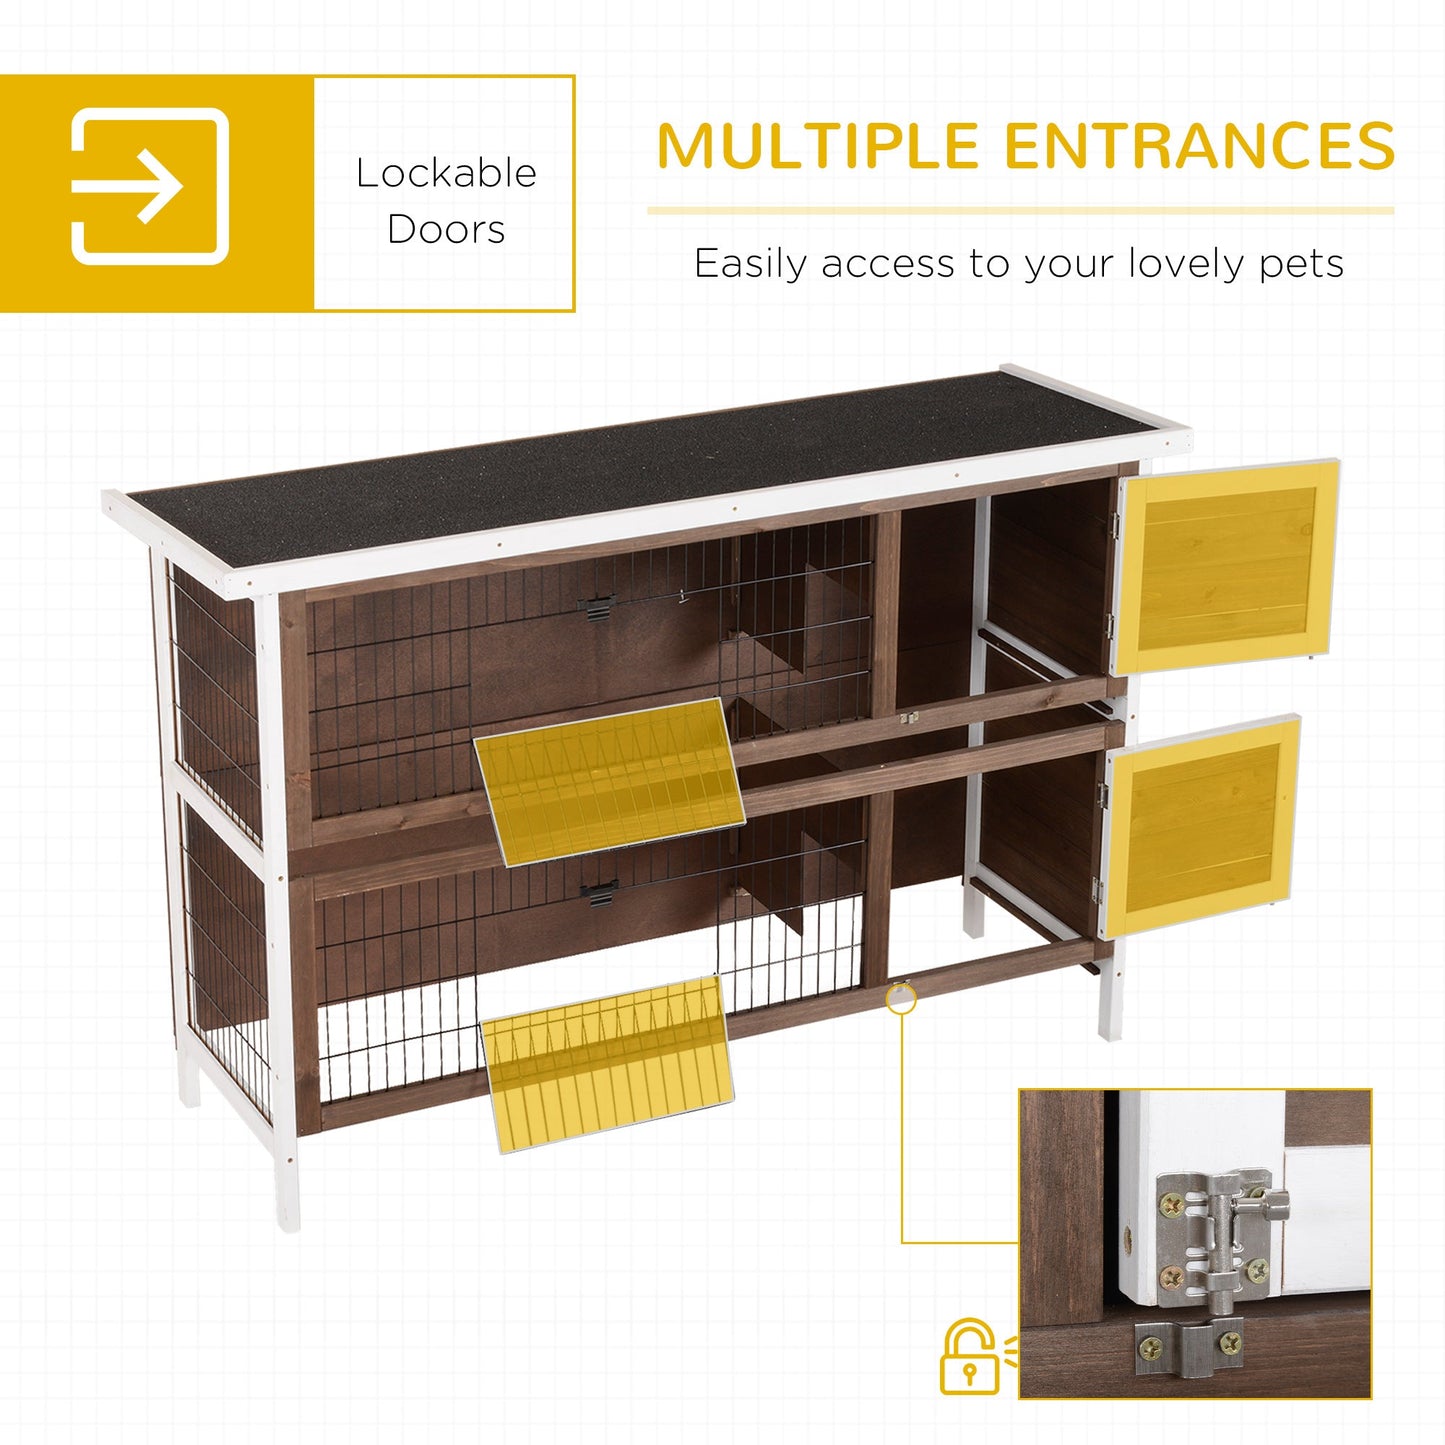 -PawHut 54" 2-Story Large Rabbit Hutch Bunny Cage Wooden Pet House with Lockable Doors, No Leak Tray and waterproof Roof for Outdoor/Indoor, Brown - Outdoor Style Company